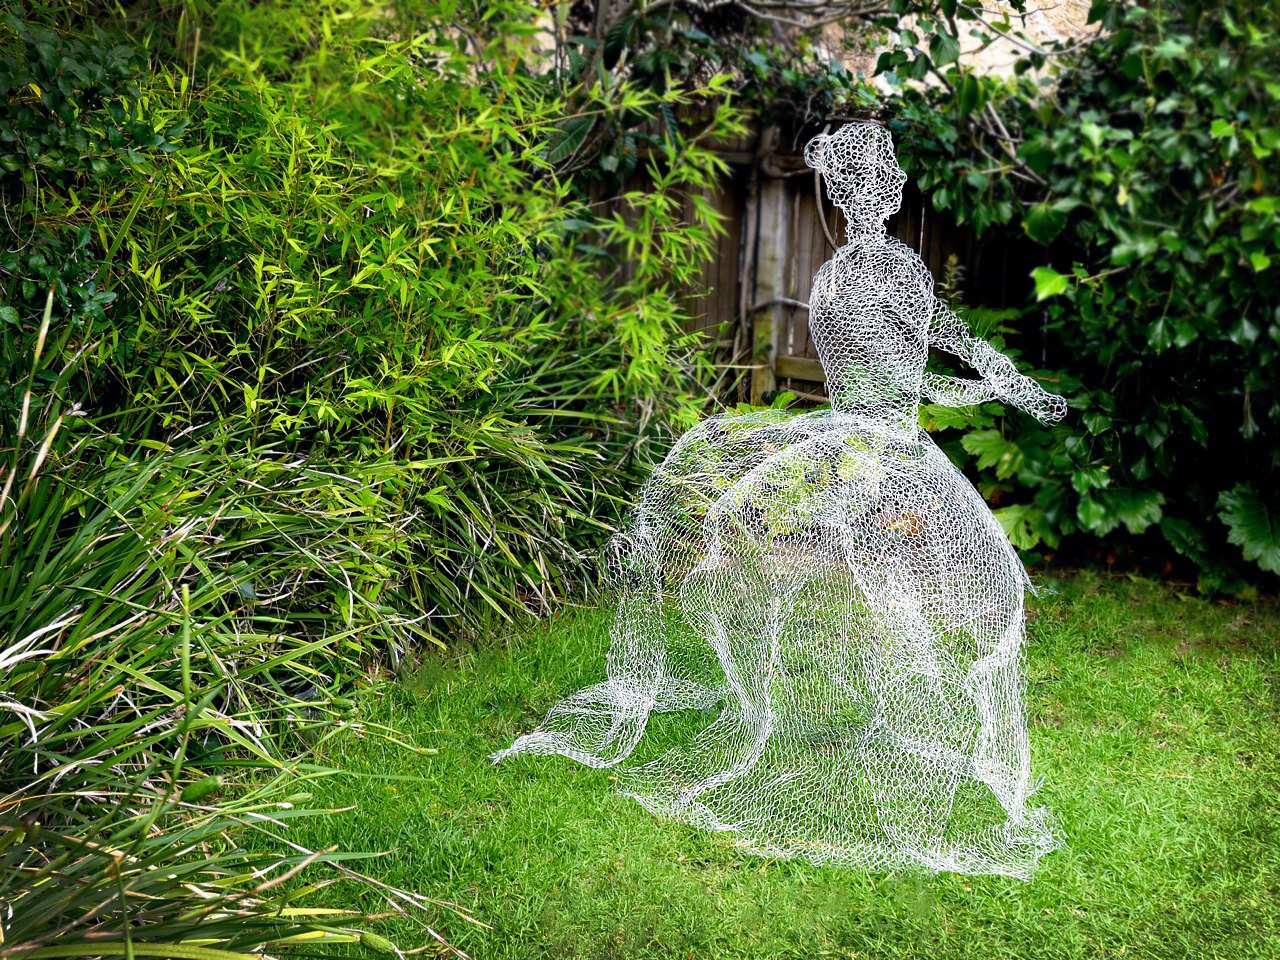 How to Make Chicken Wire Ghosts | eHow